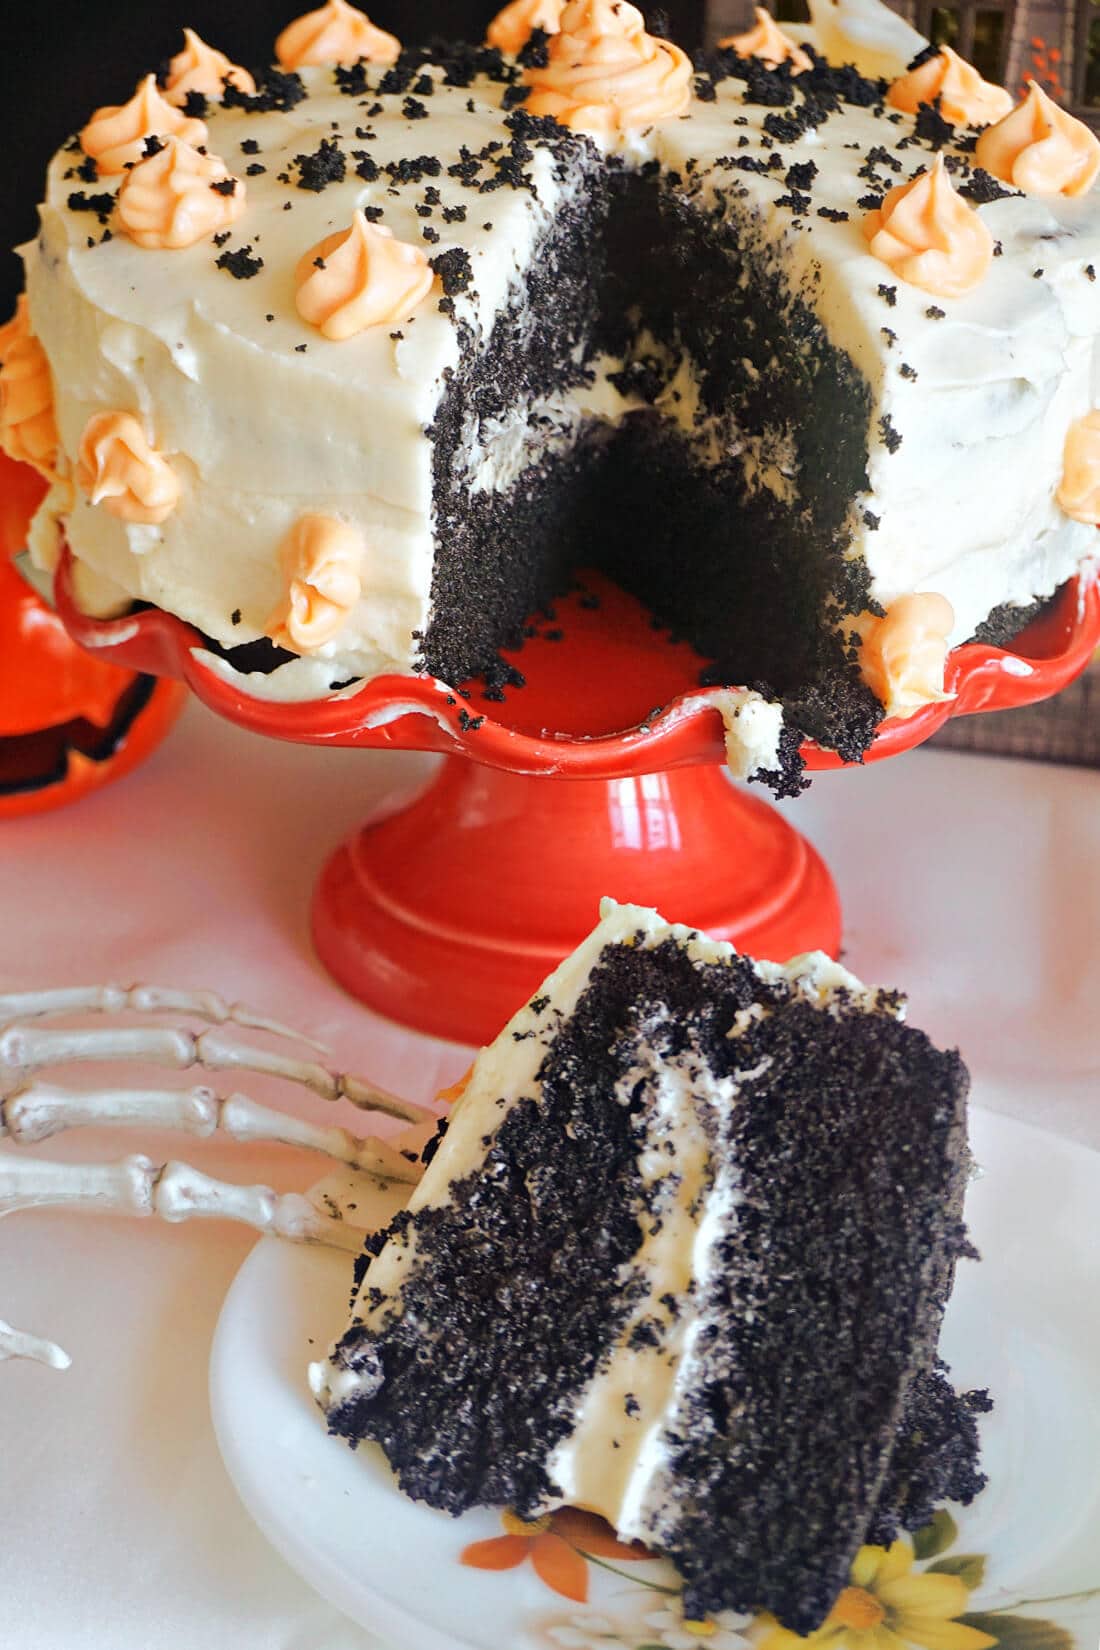 A slice of black velvet cake on a white plate with a cake stand with more cake in the background.